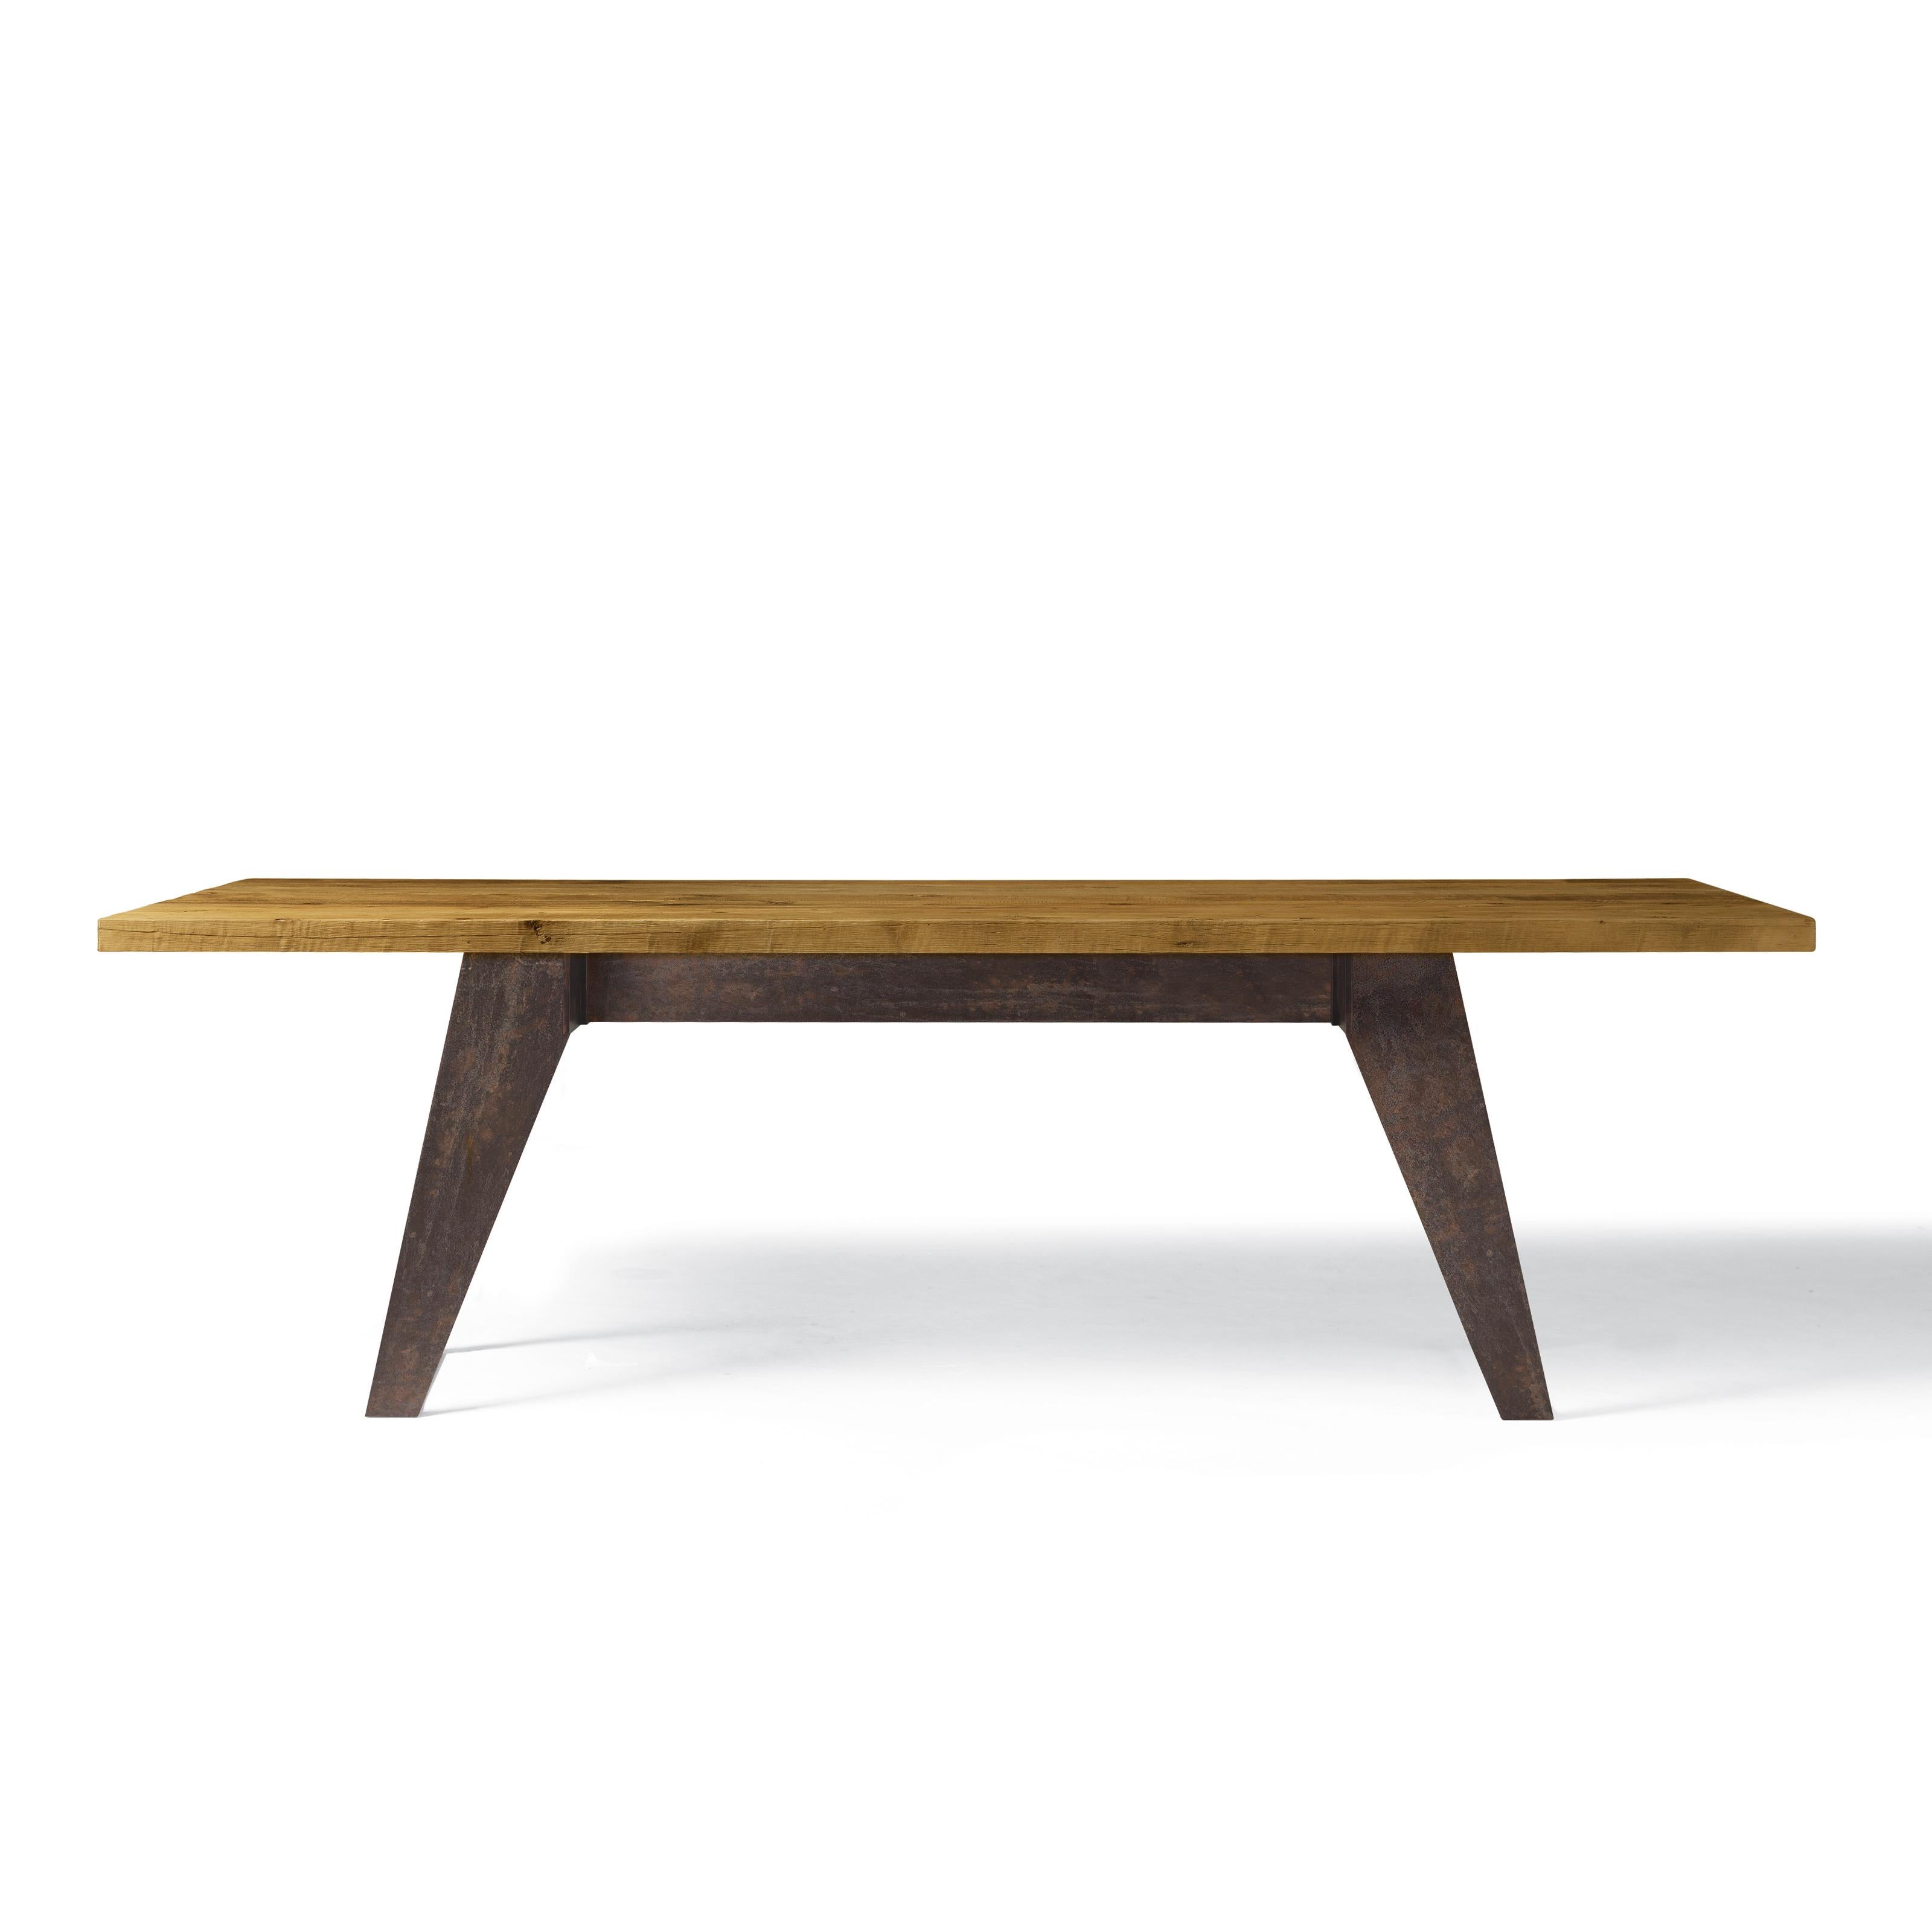 A refined, simple and functional design sets the Misura solid wood tables apart. These modular tables are all about the top, expression of the natural beauty of the selected type of wood. Handmade in Italy, they are the result of expert